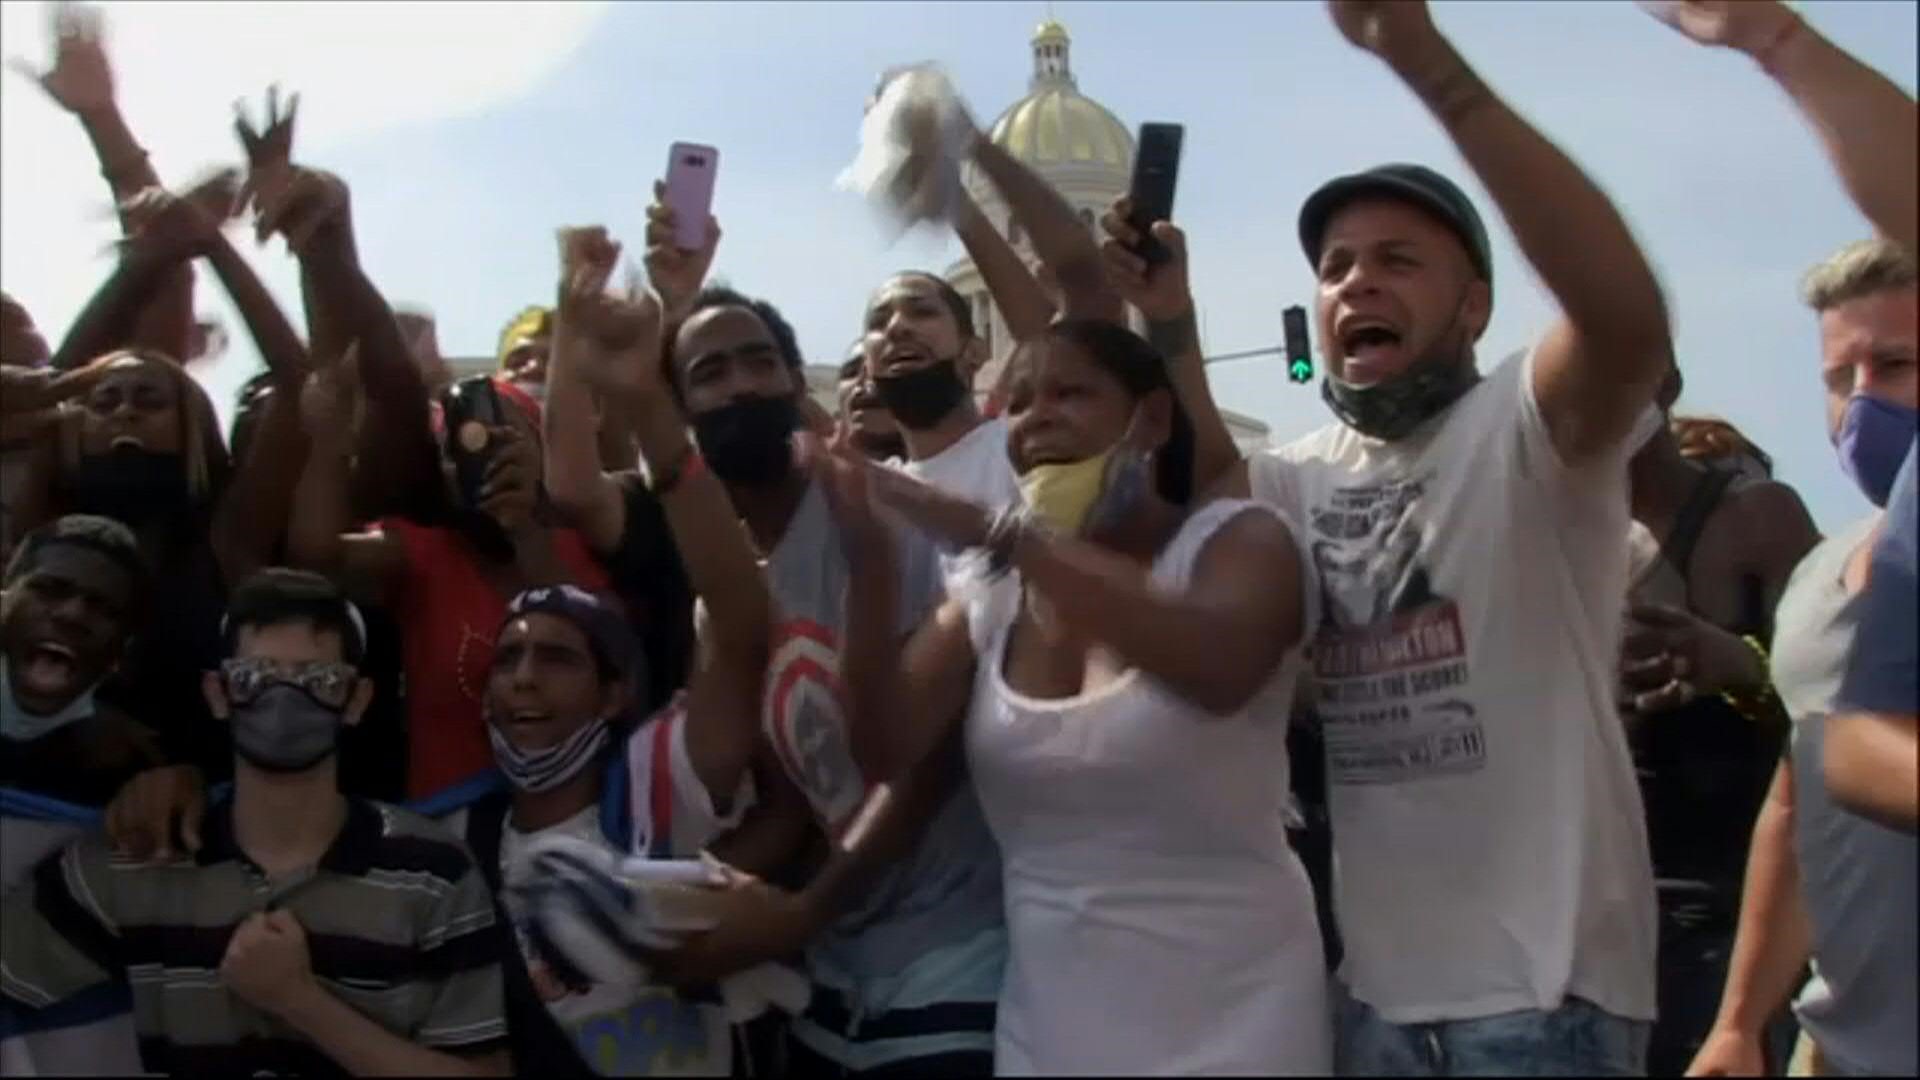 Demonstrators participated in protests against power cuts in Cuba